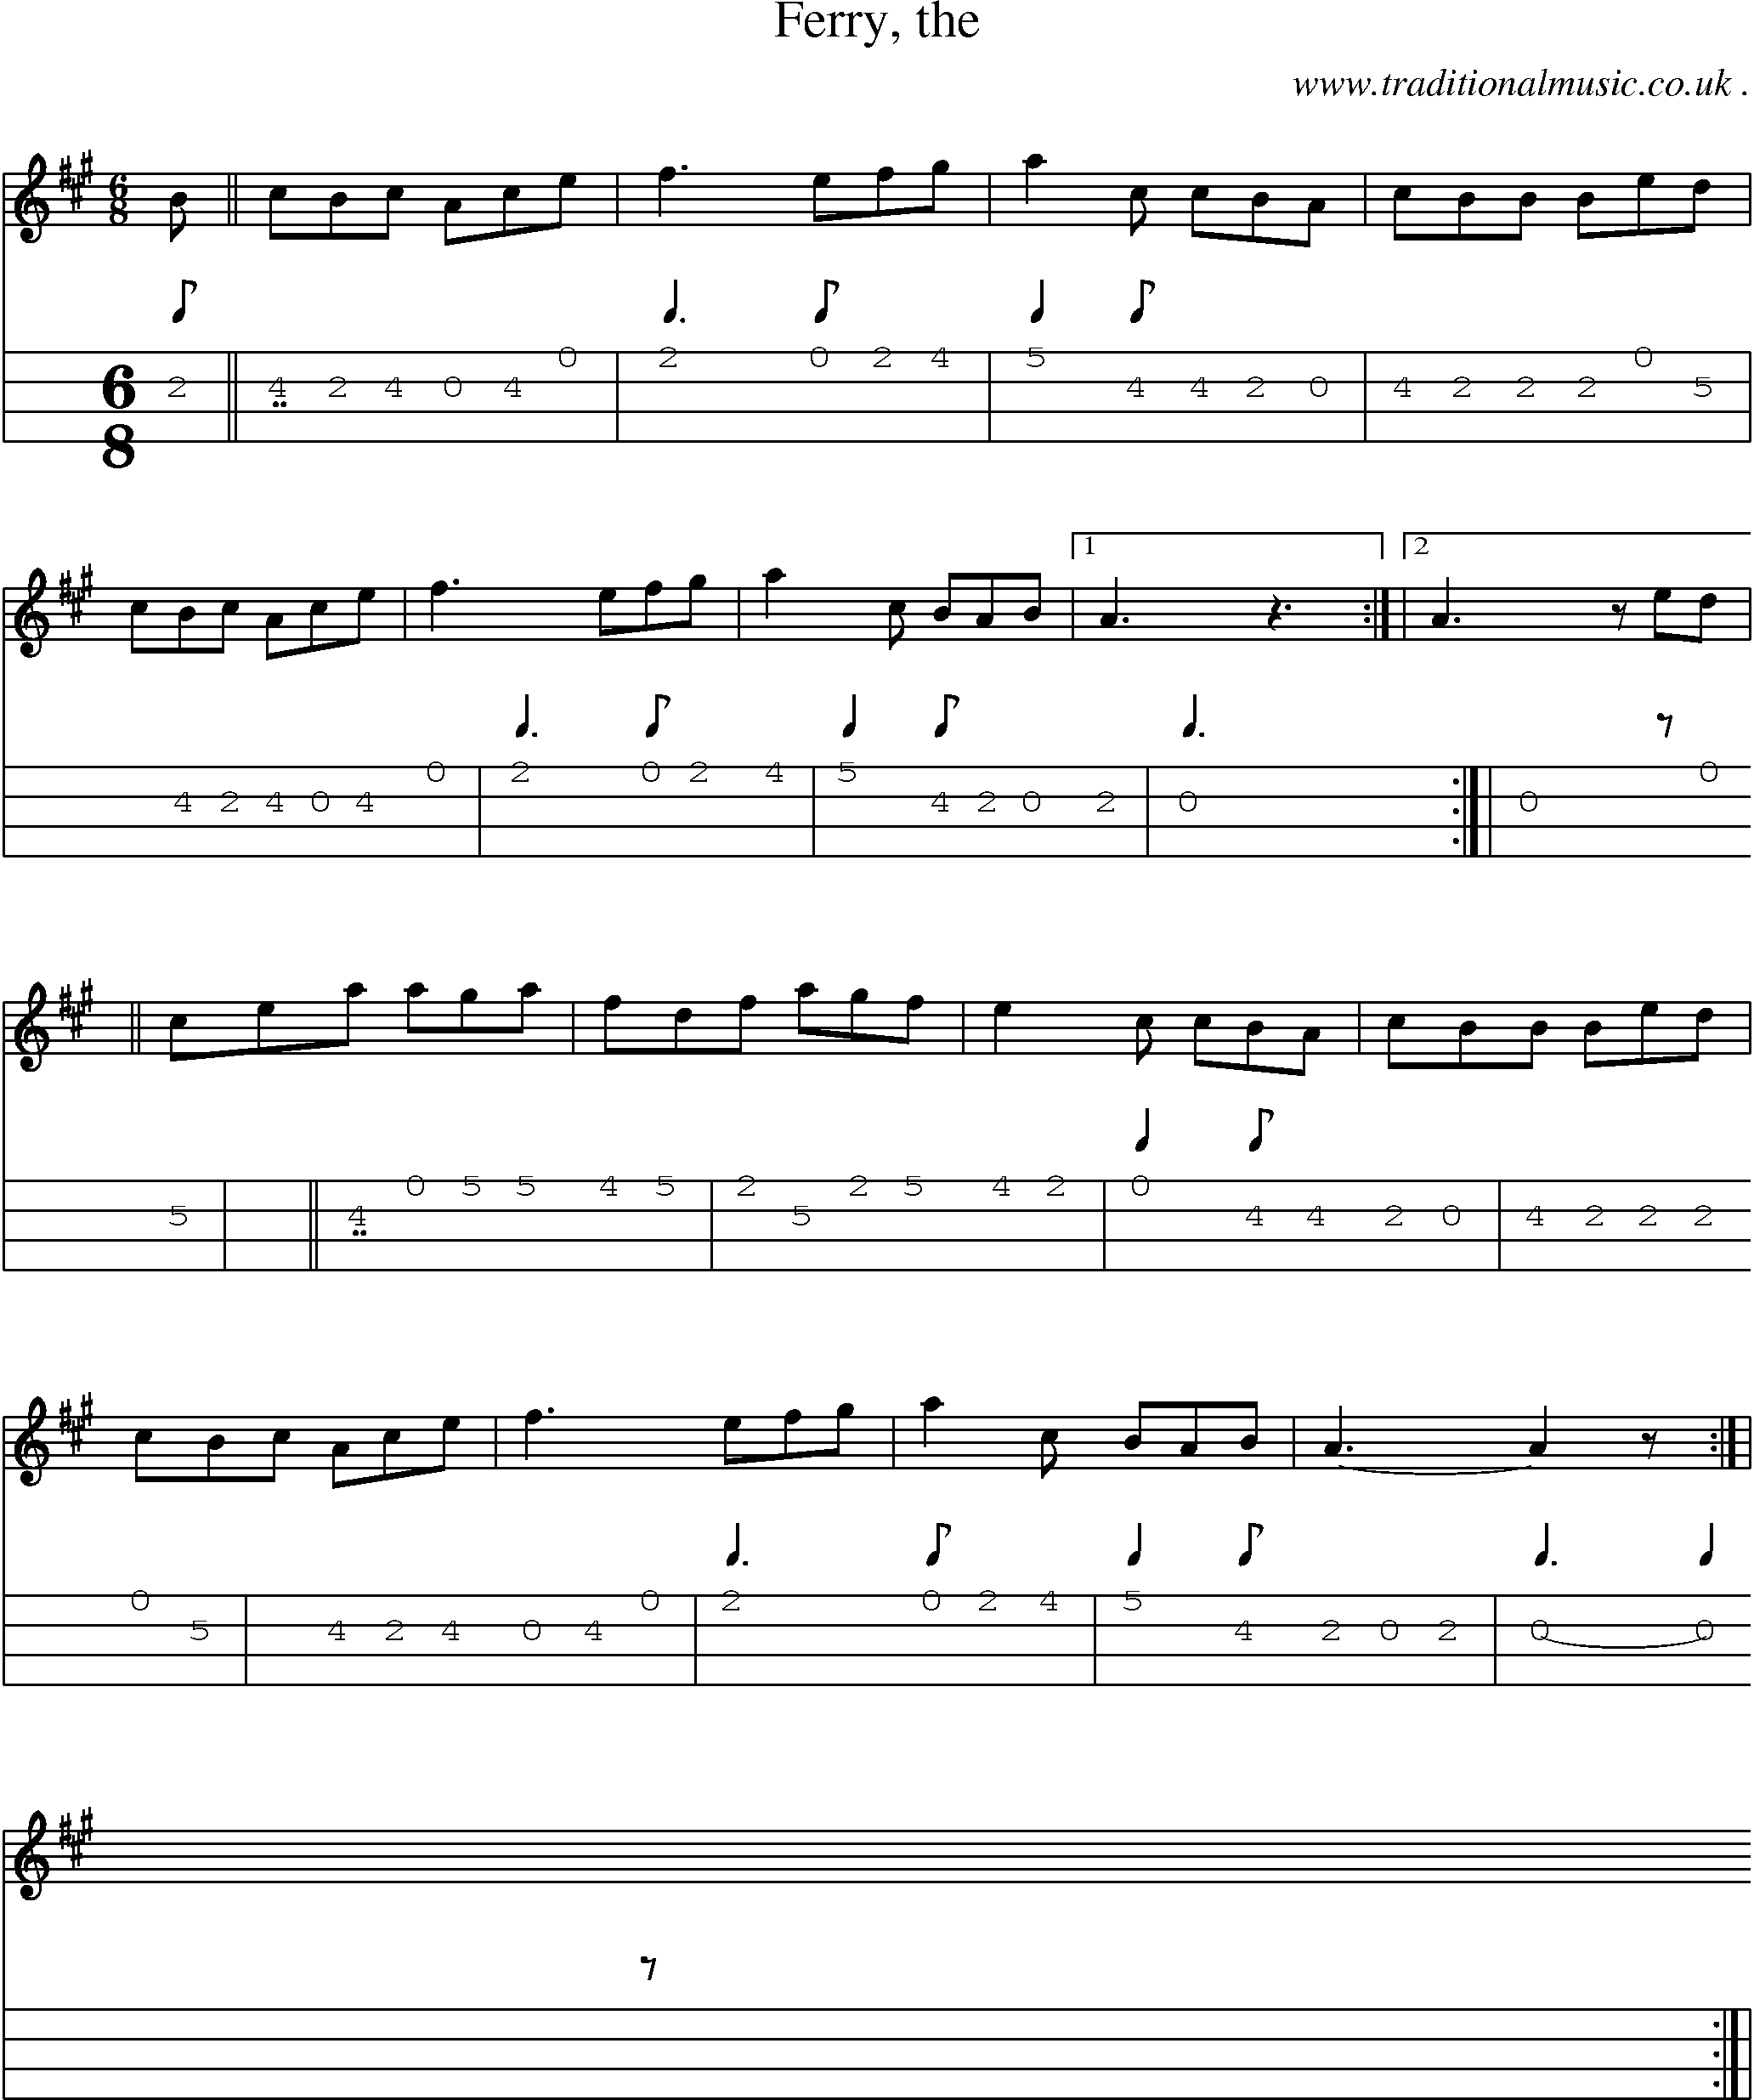 Sheet-music  score, Chords and Mandolin Tabs for Ferry The